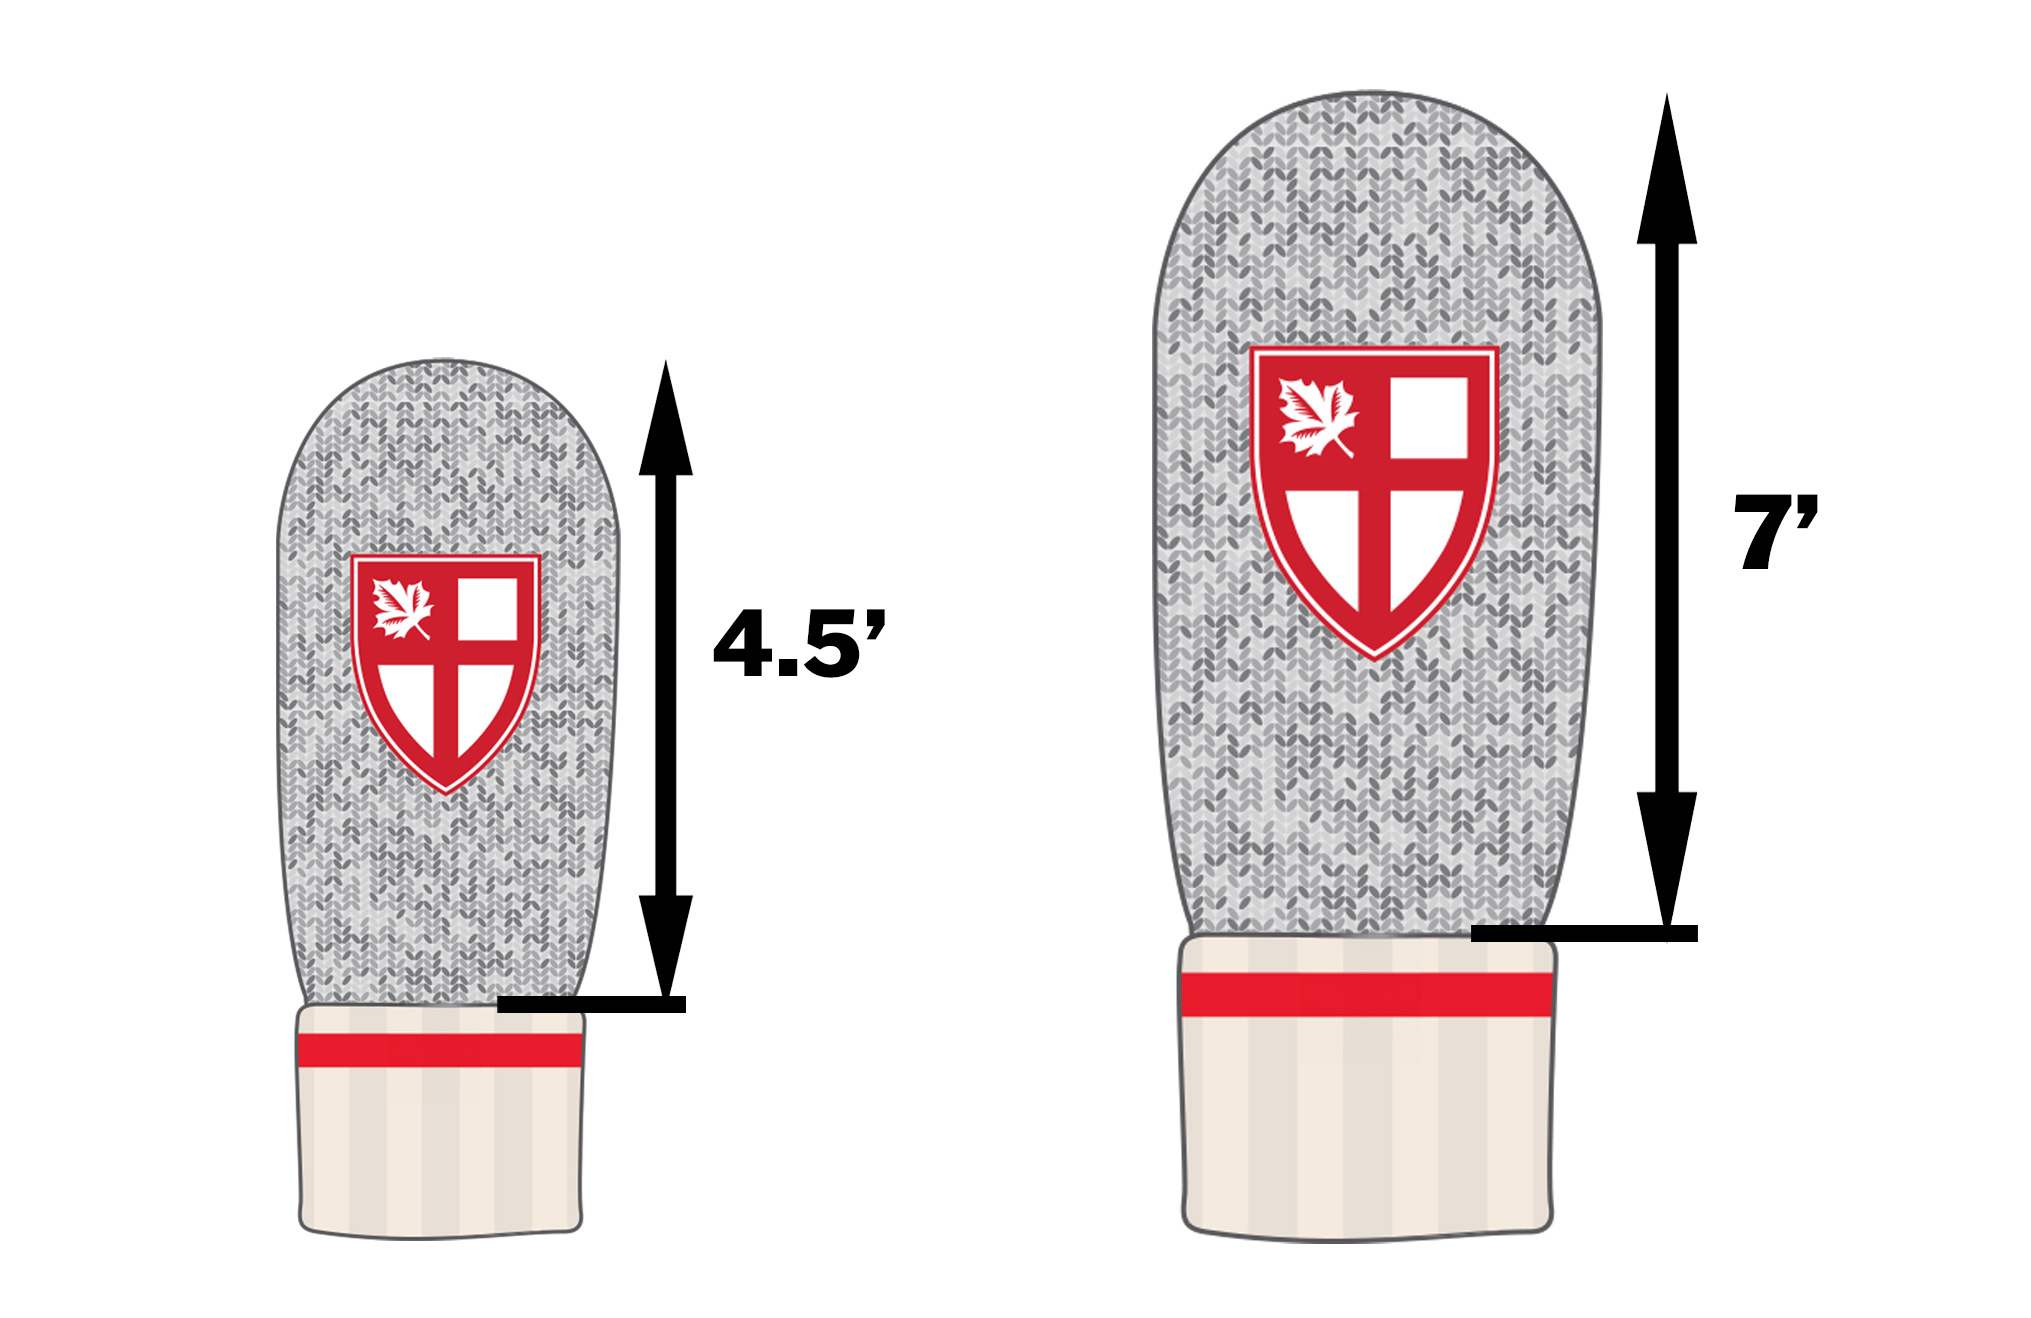 Mittens Sizing Guide